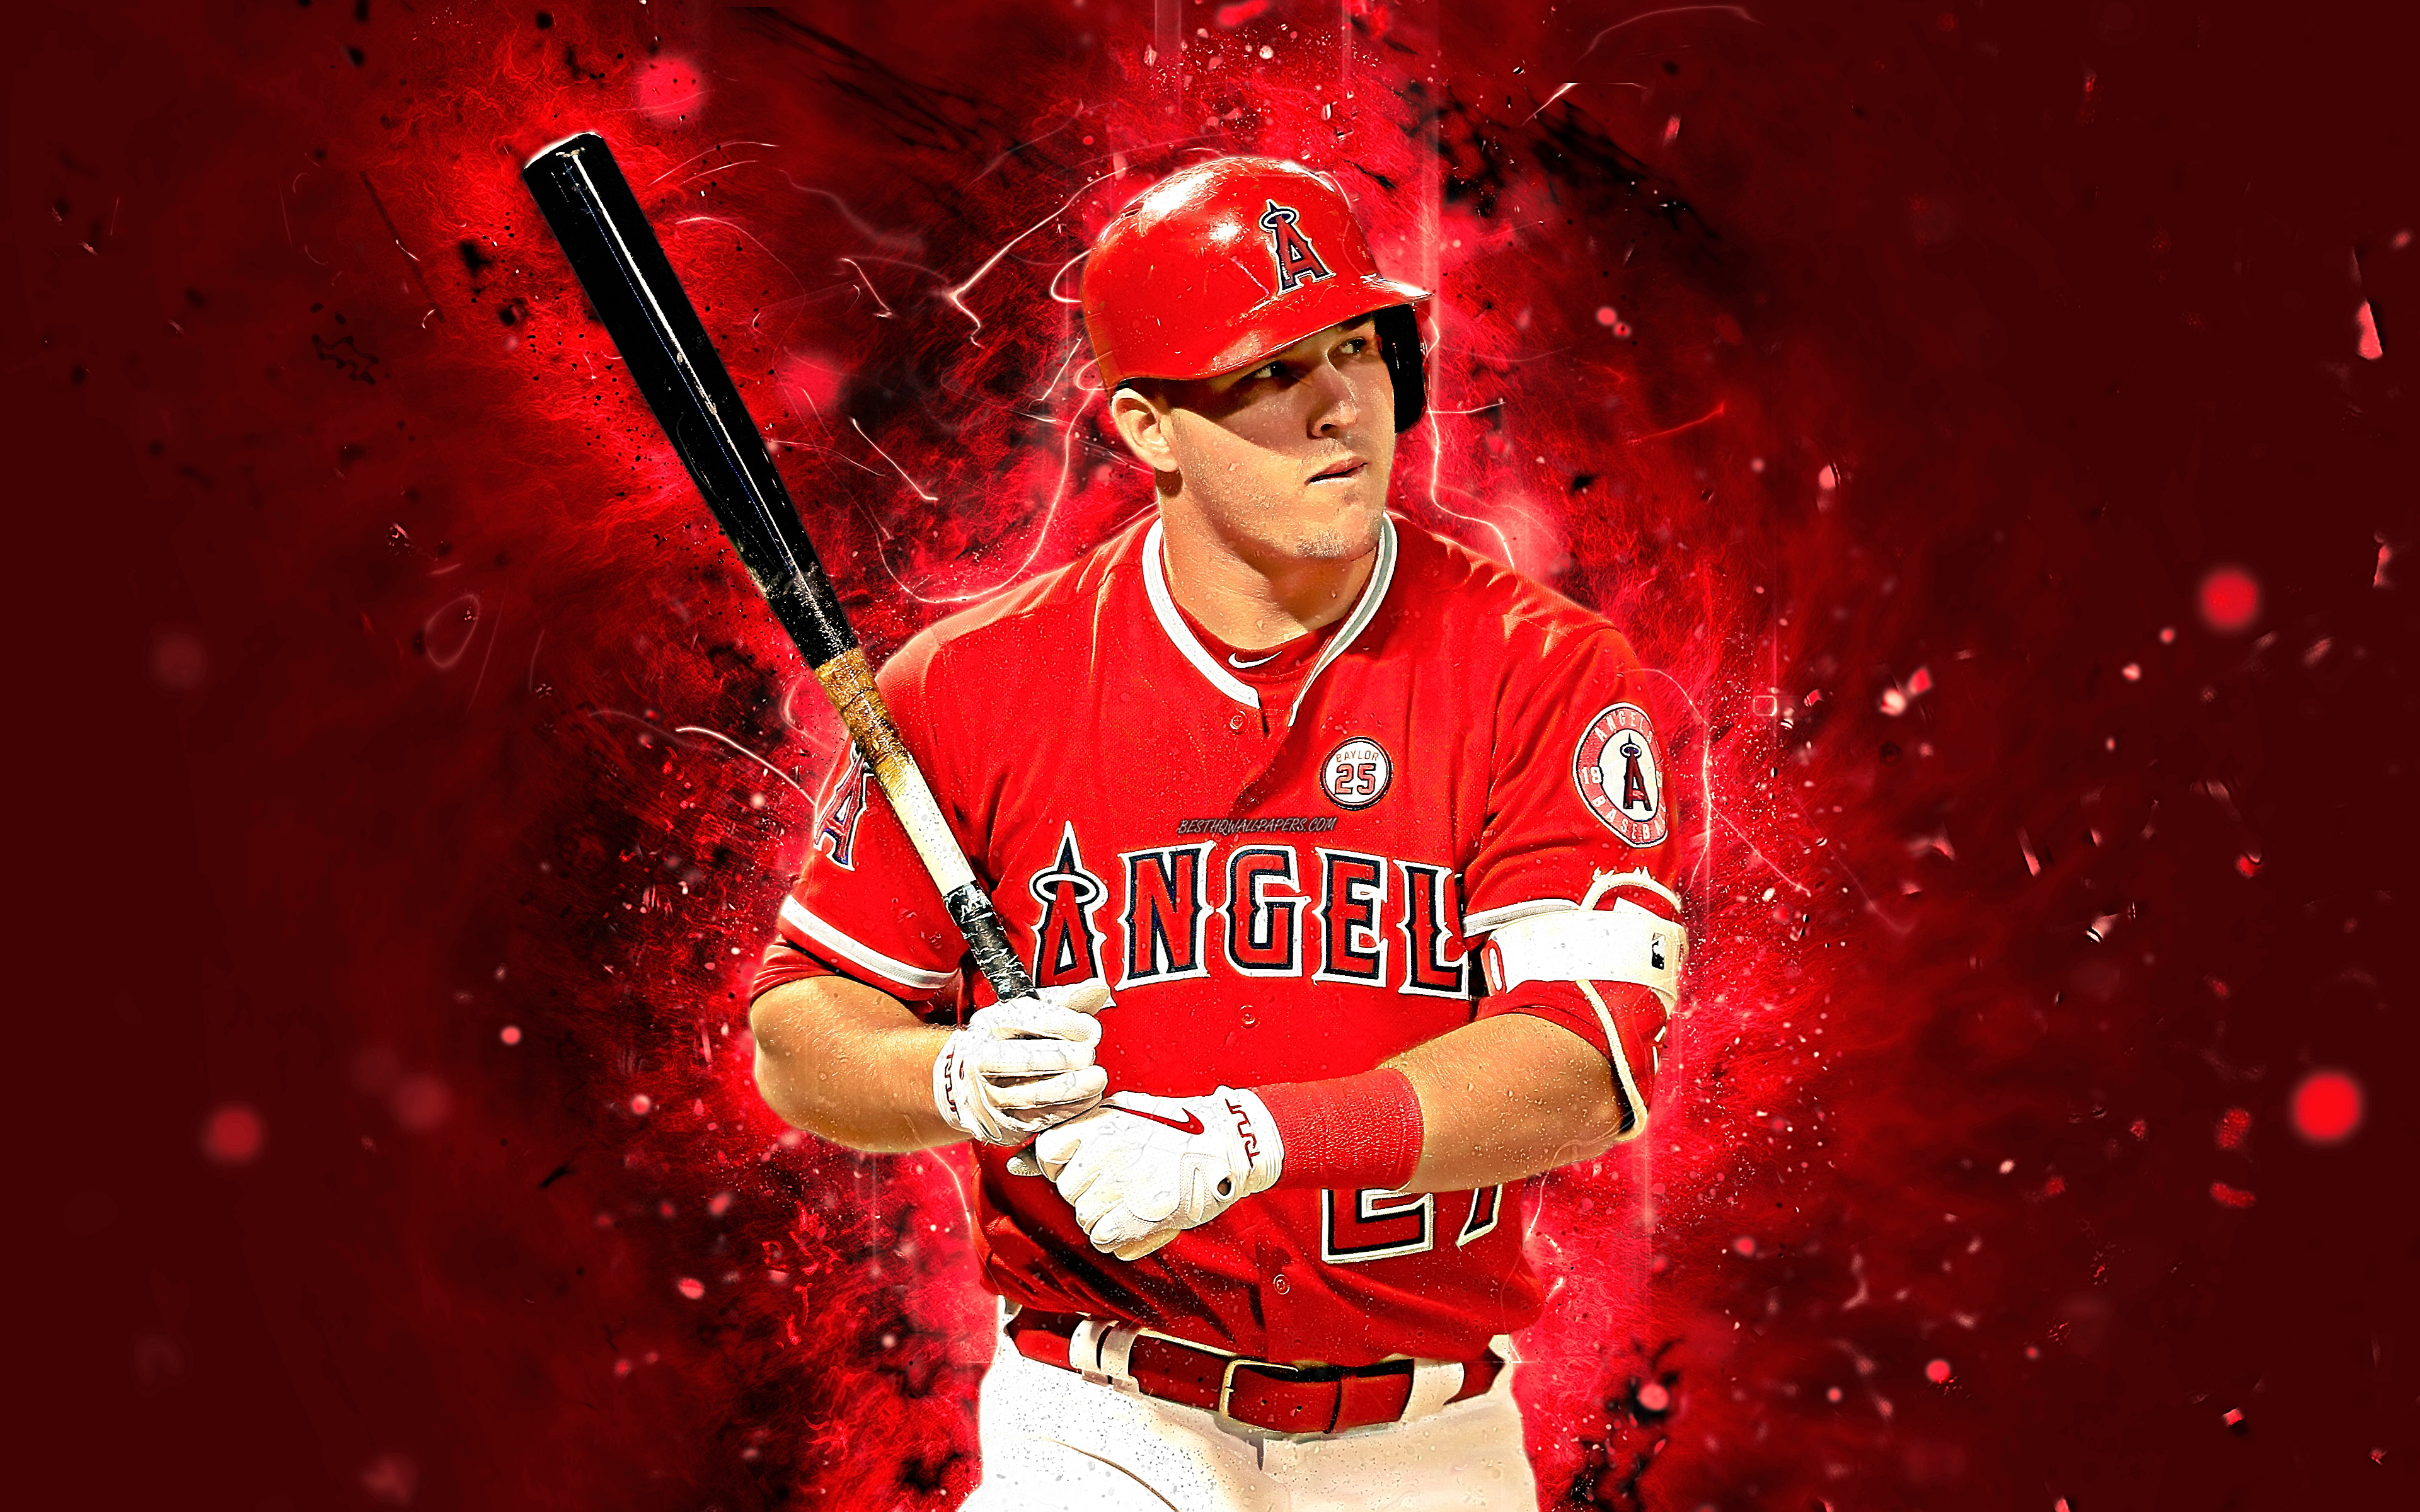 Download wallpaper Mike Trout, 4k, center fielder, abstract art, baseball, MLB, Los Angeles Angels, Trout, Major League Baseball, neon lights, LA Angels, creative for desktop with resolution 3840x2400. High Quality HD picture